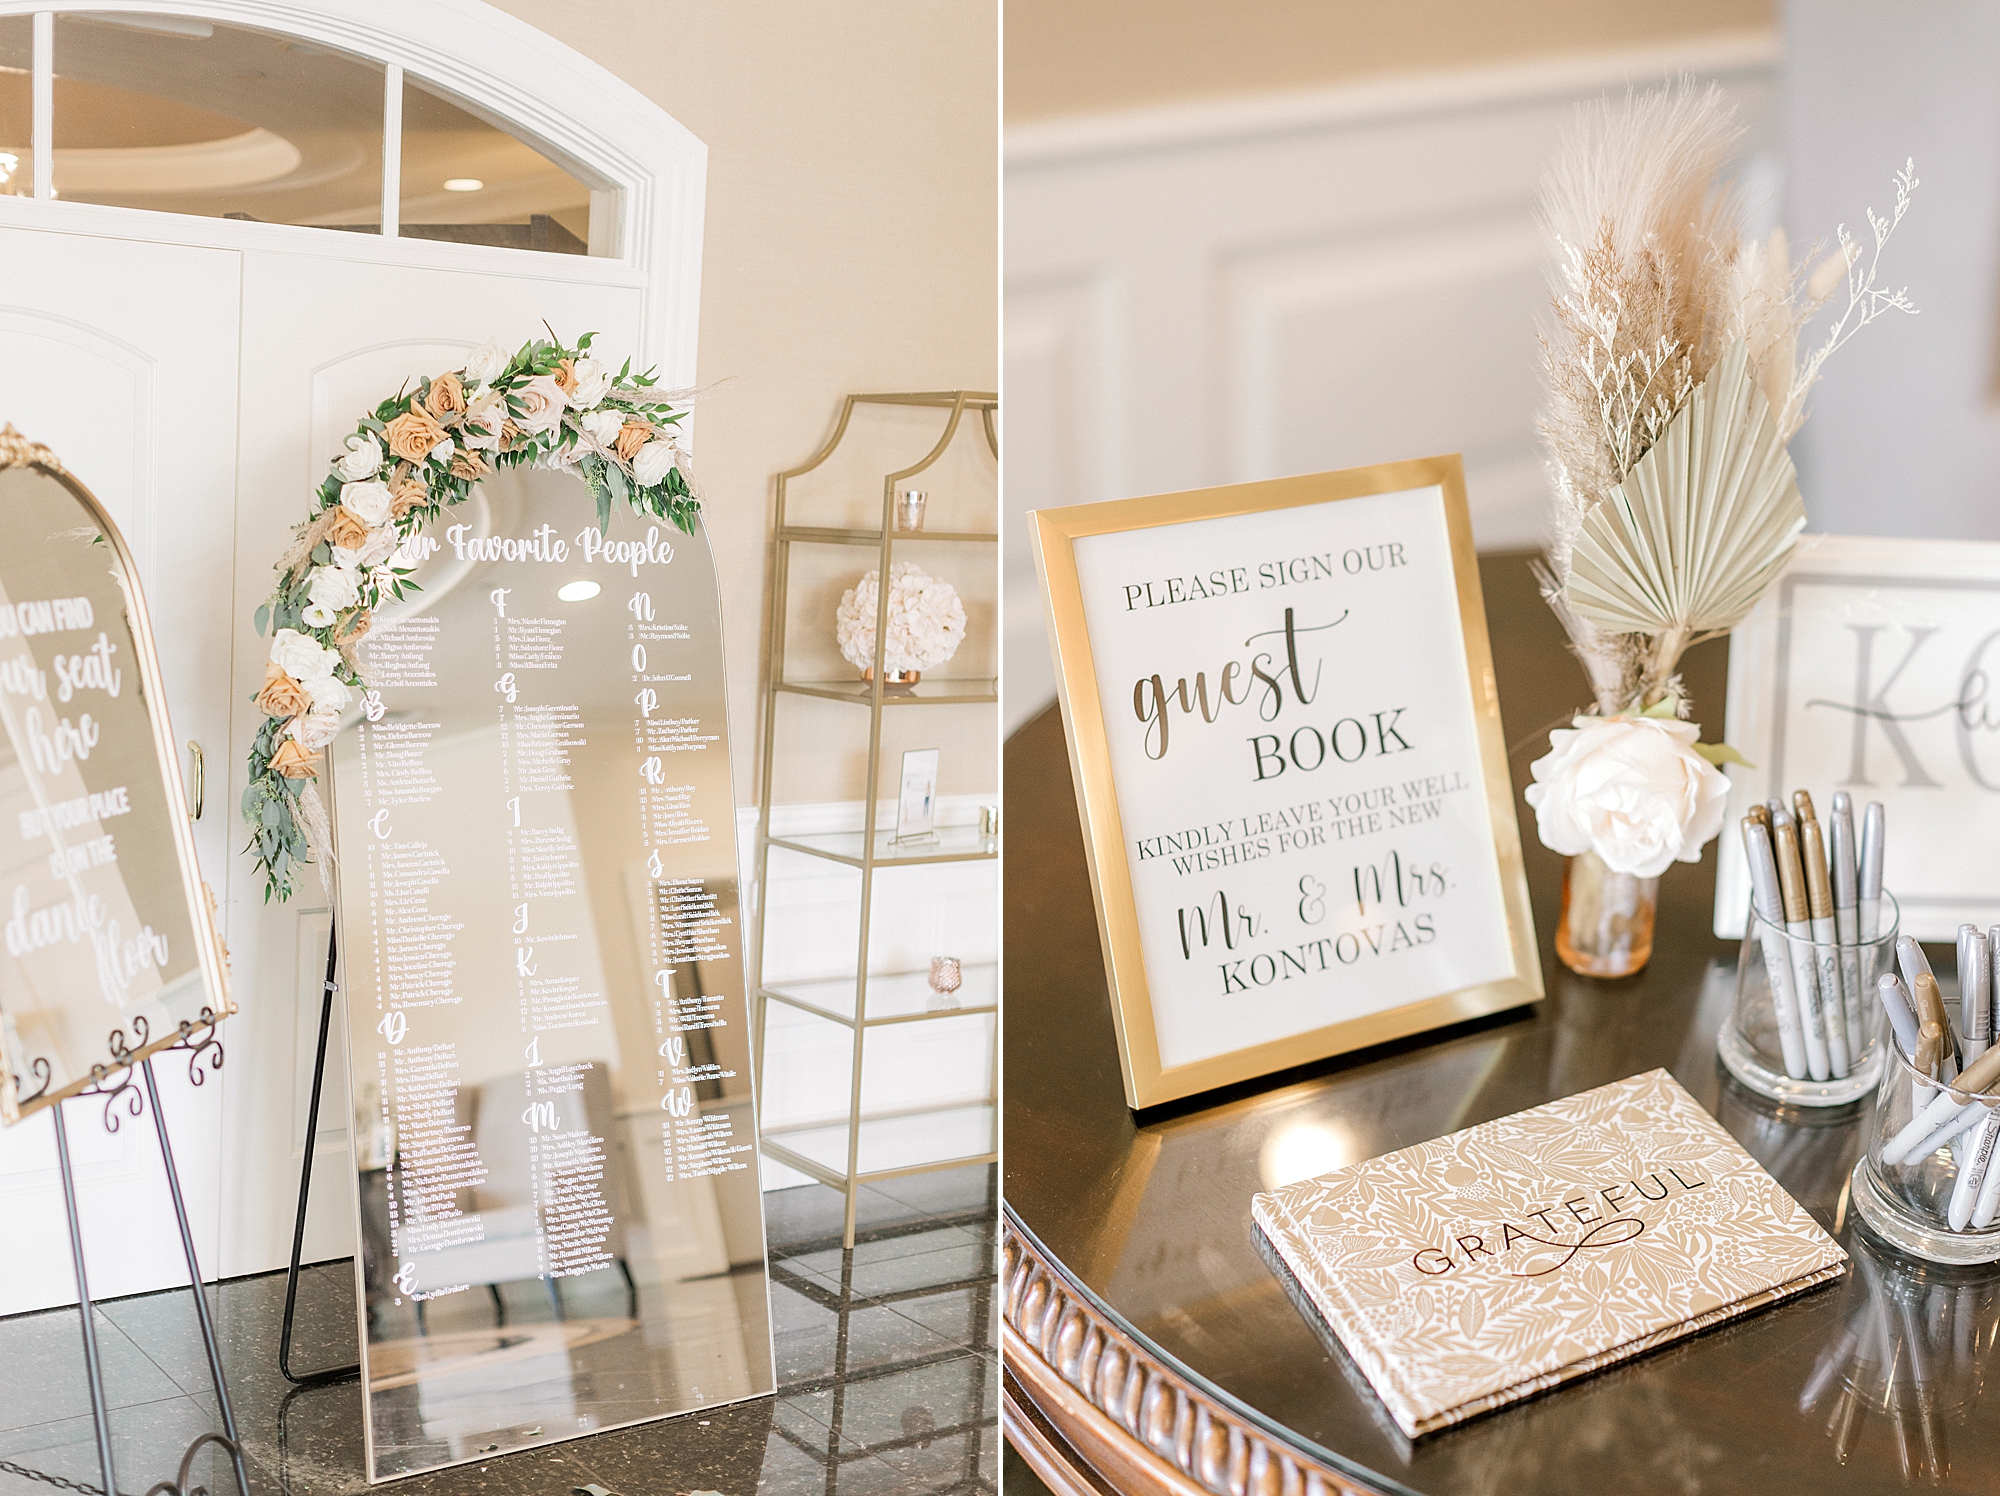 seating chart on mirror with gold frame and guest book for NJ wedding reception